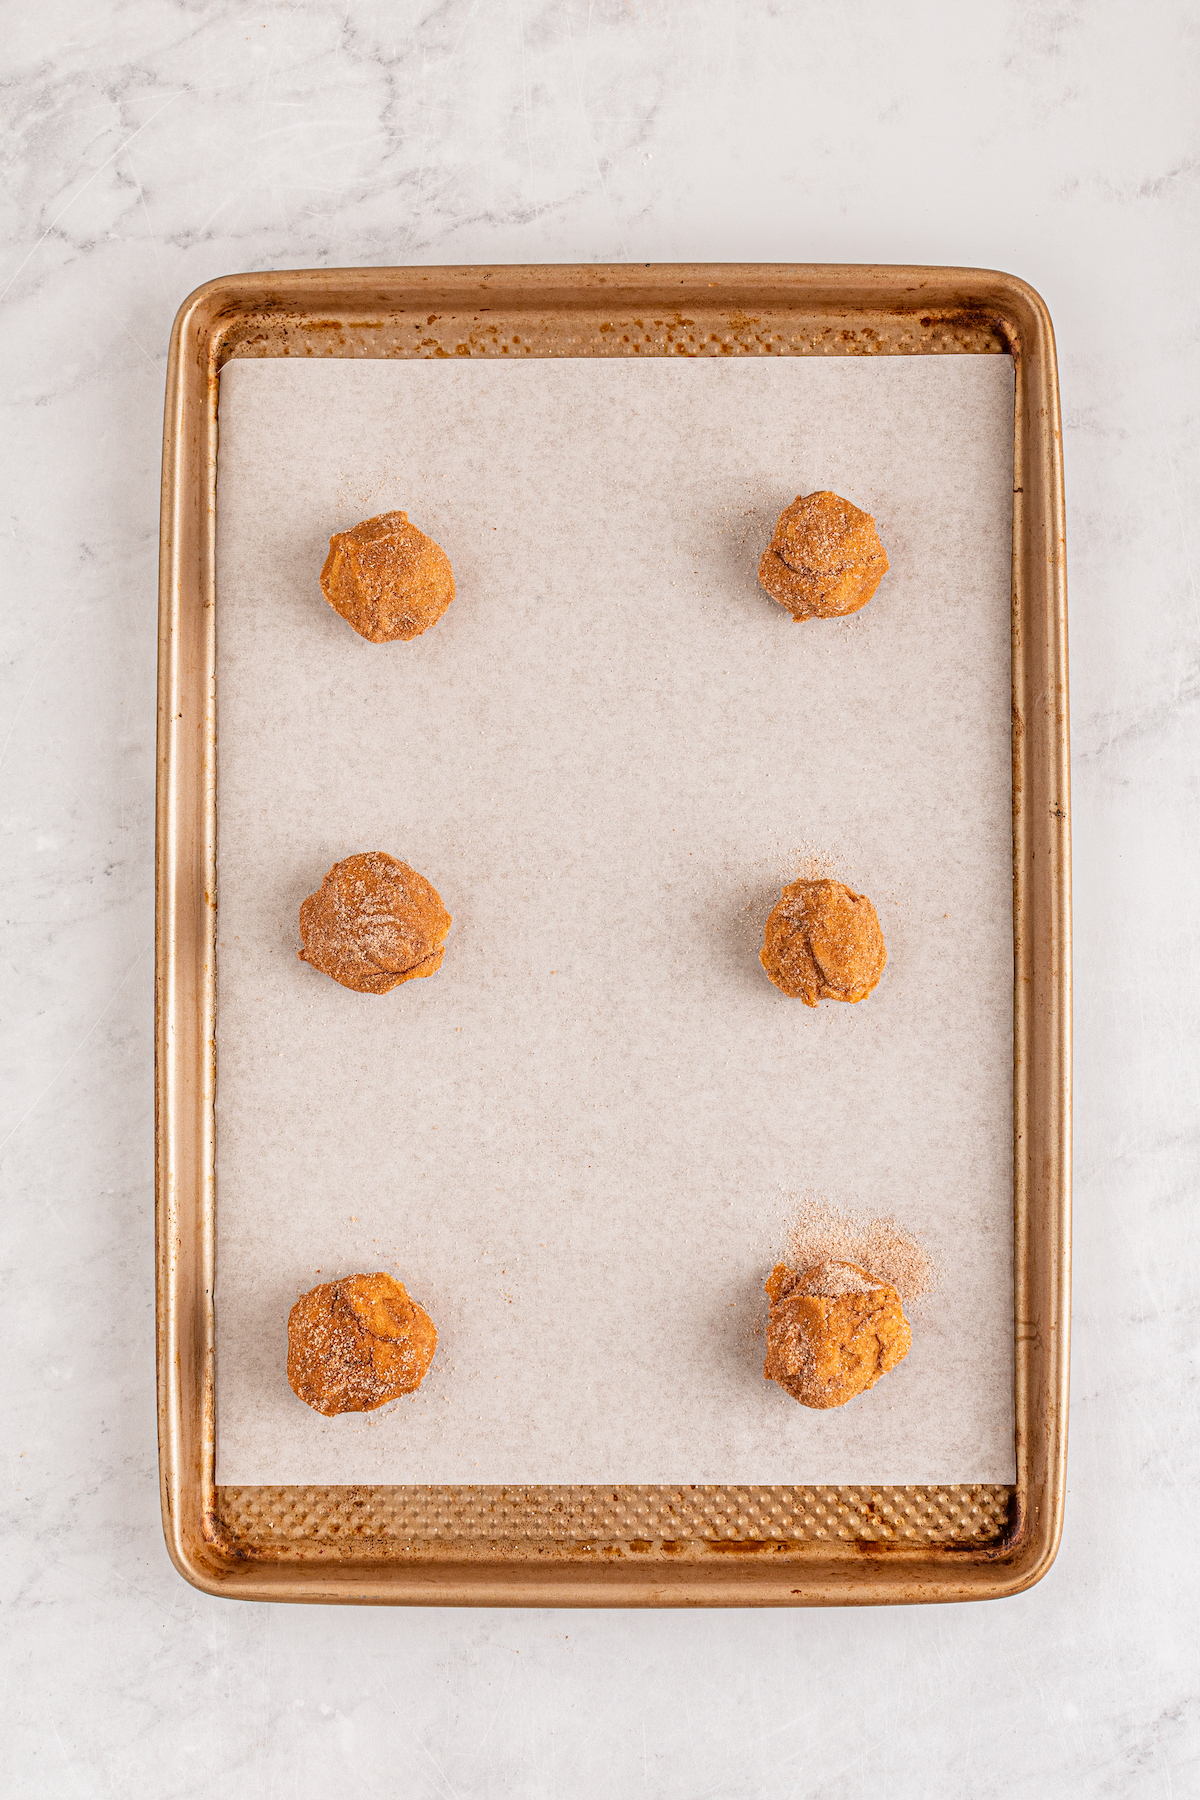 Balls of dough coated in cinnamon sugar on a parchment lined baking sheet.